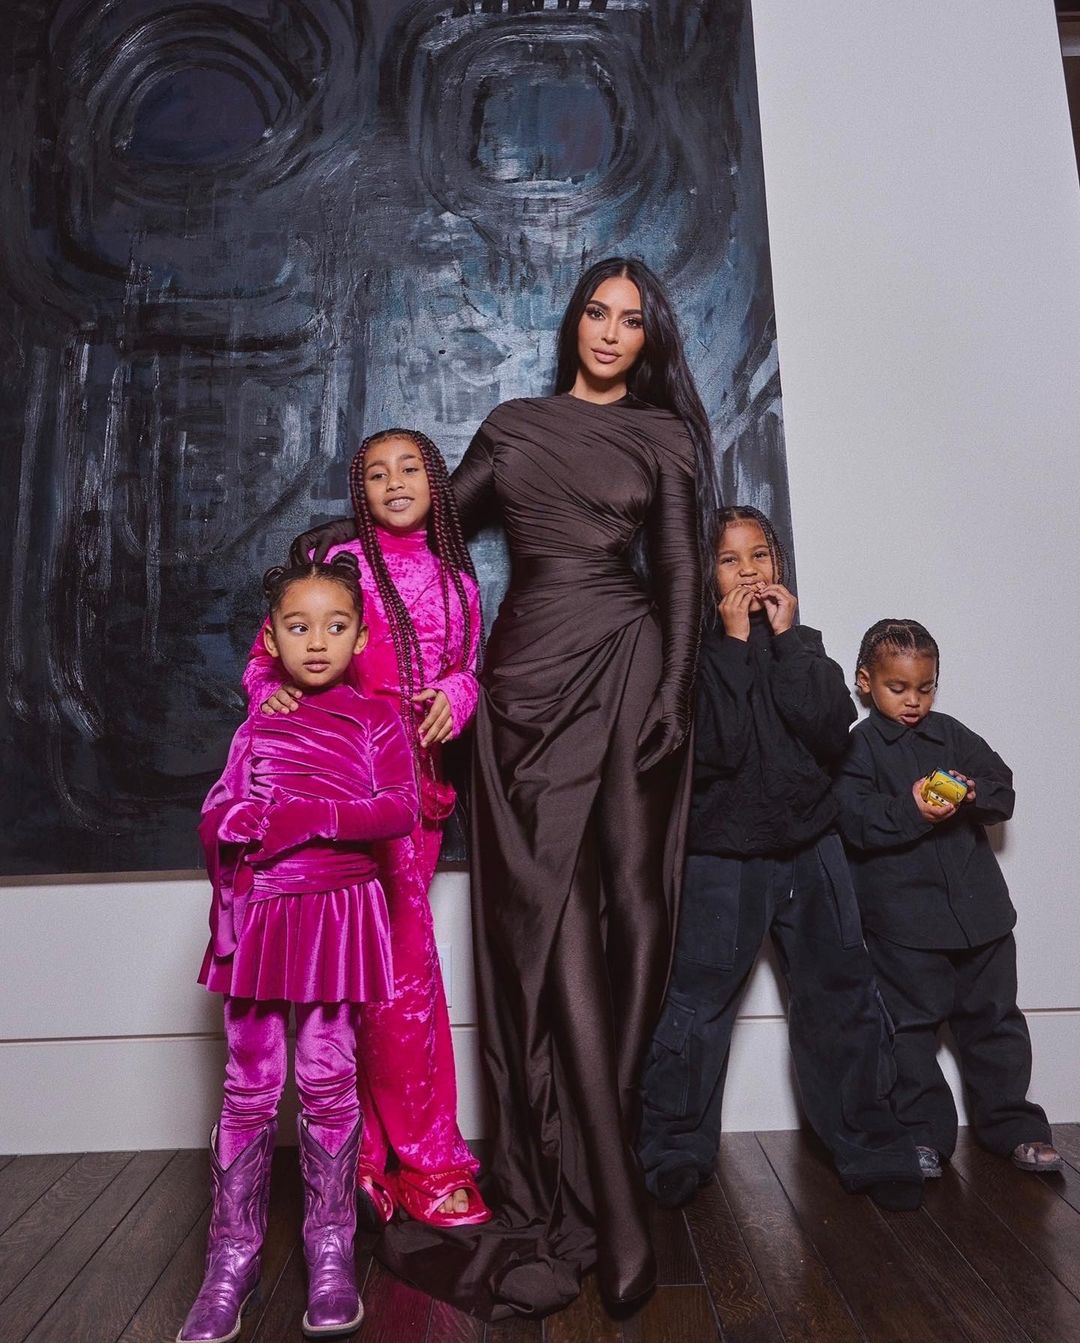 Kim shares children North, Saint, Chicago, and Psalm with her ex-husband